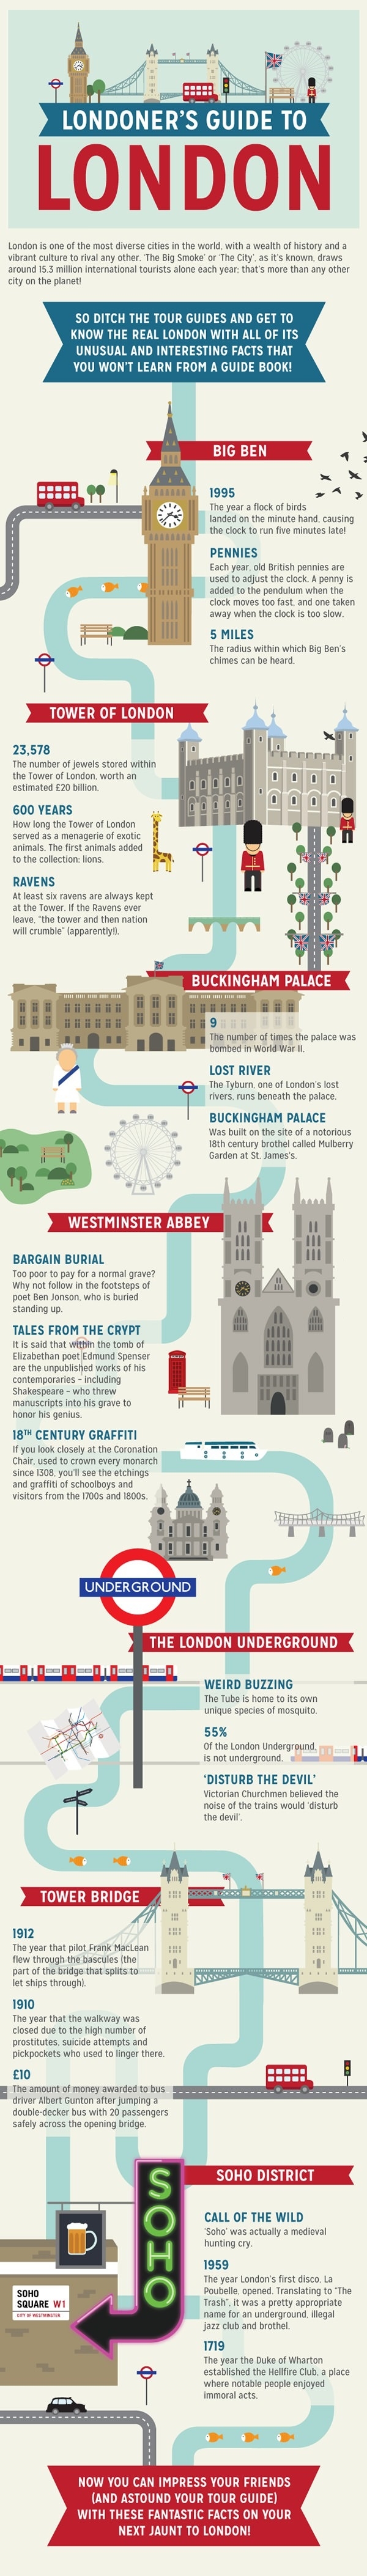 Londoner's guide to London